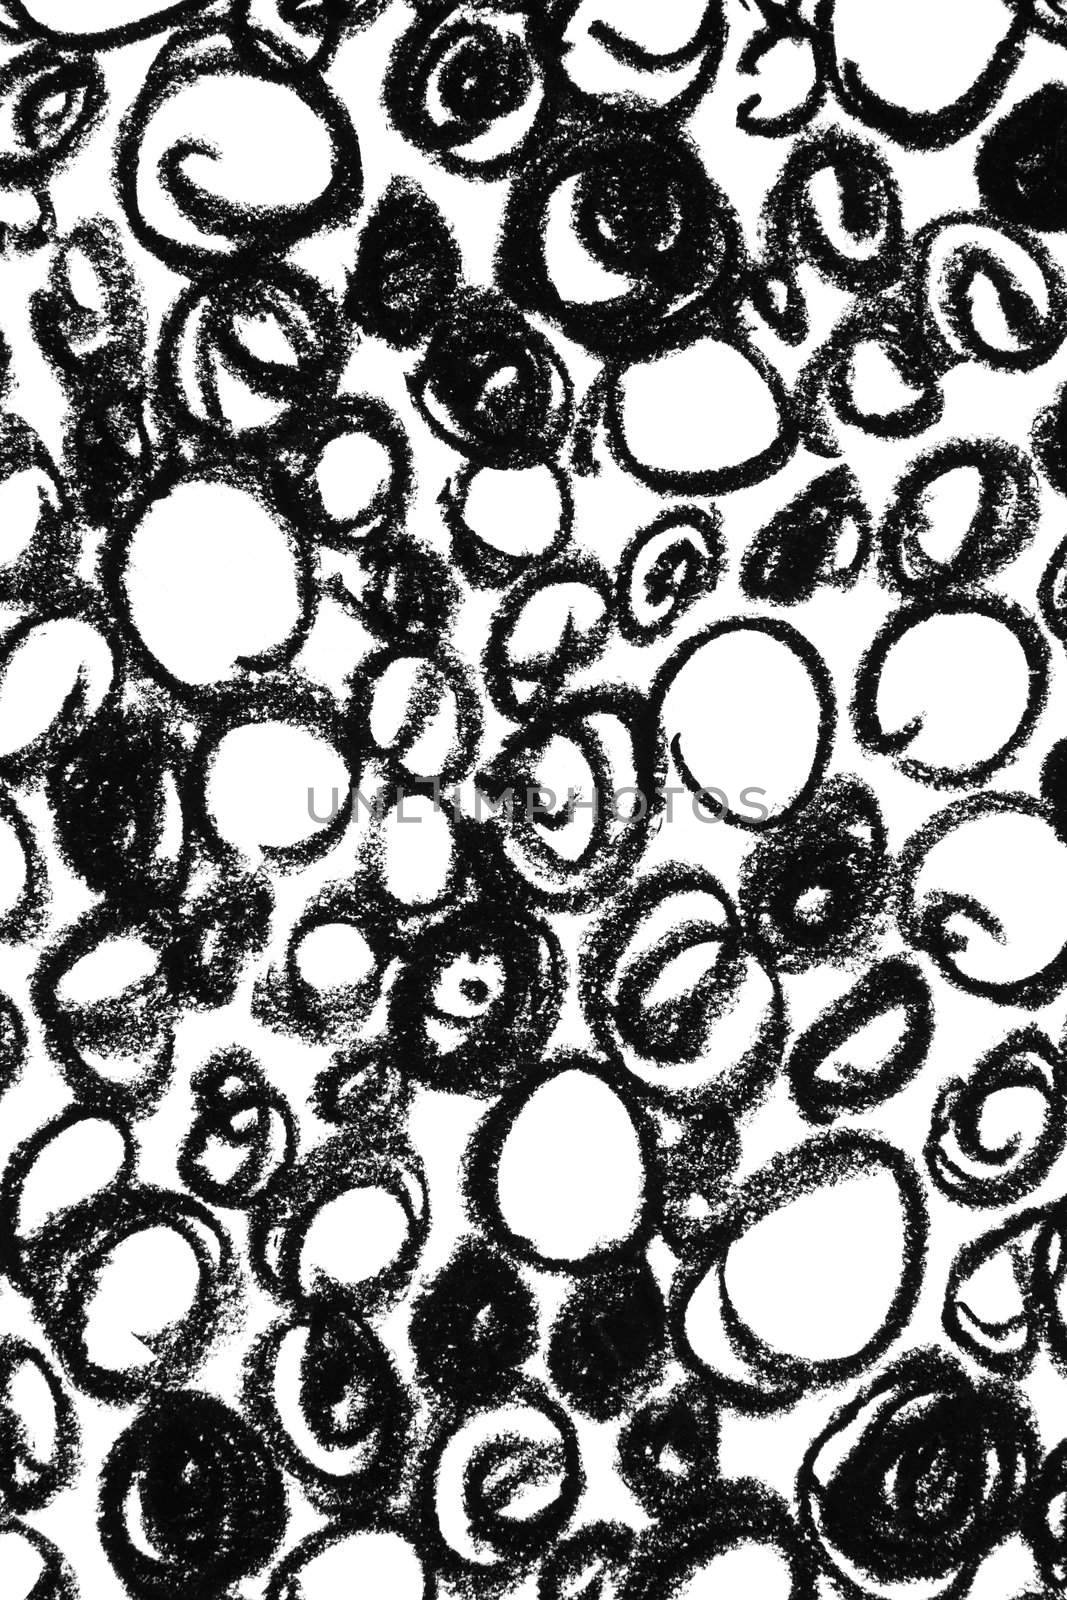 Black and white bubbles background by anikasalsera